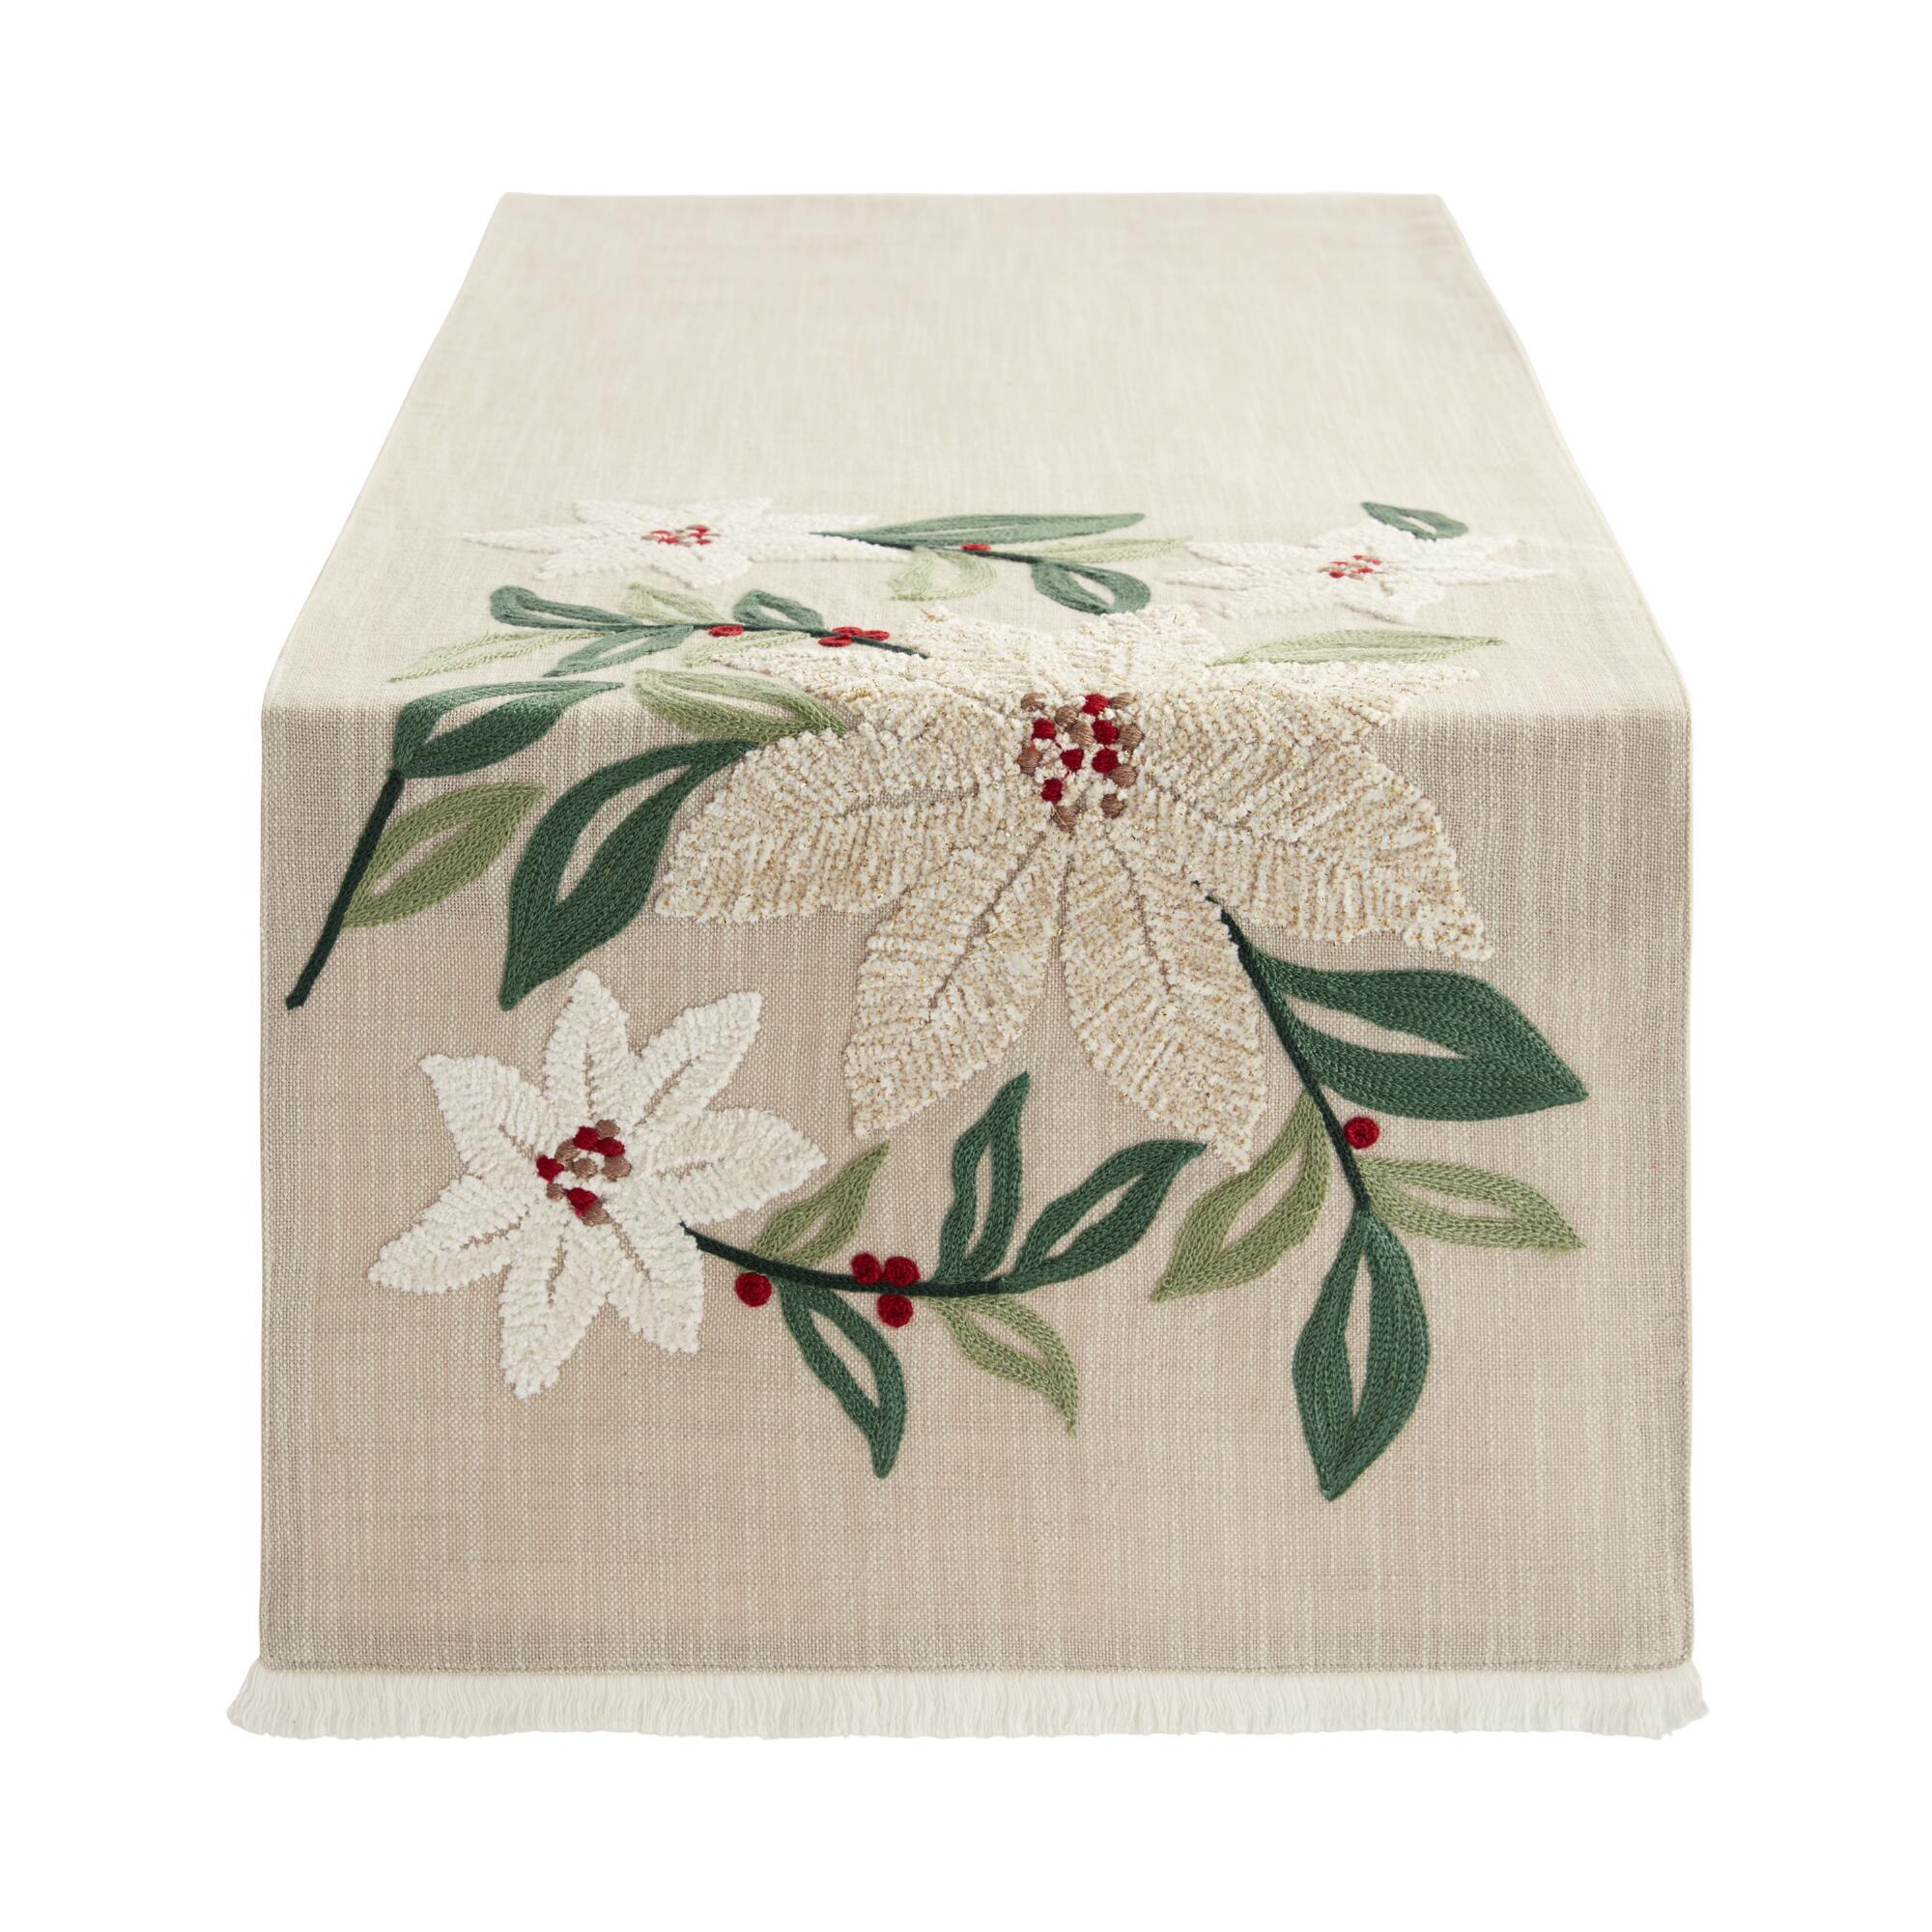 Pier Place Natural Holiday Floral Embroidered Table Runner: Multi - Cotton by World Market